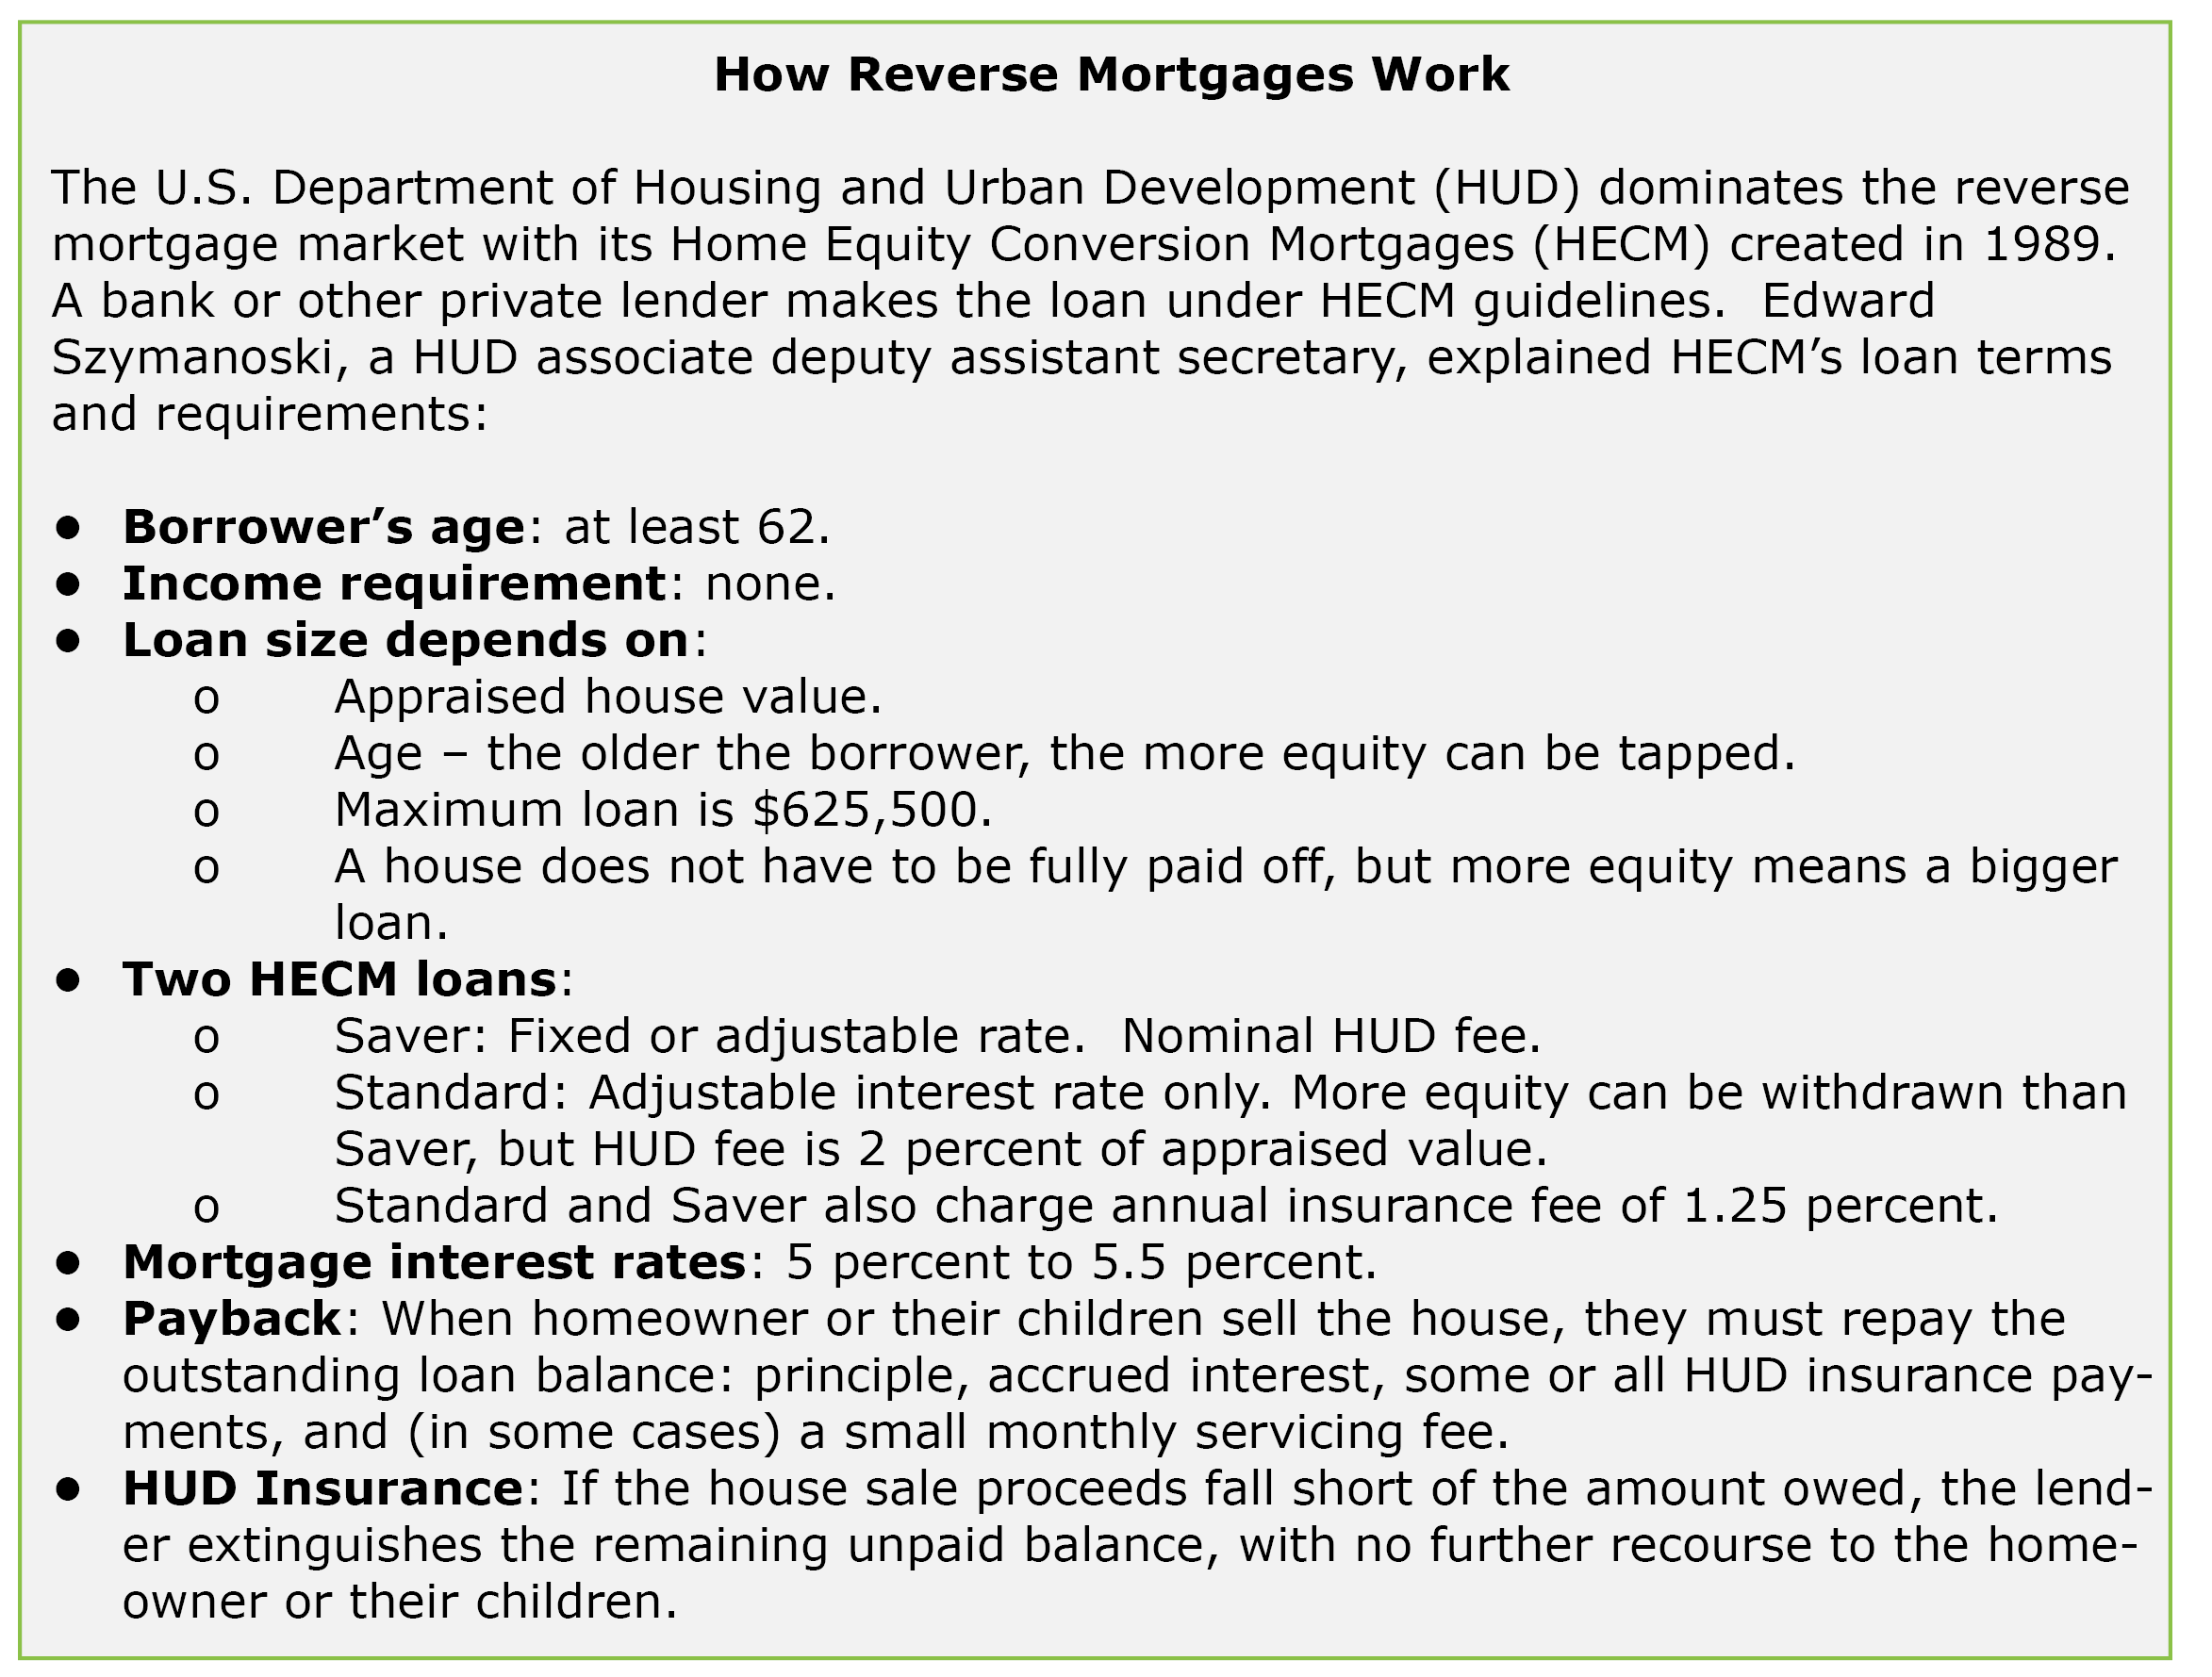 Reverse Mortgage: What It Is and Why It's a Bad Idea